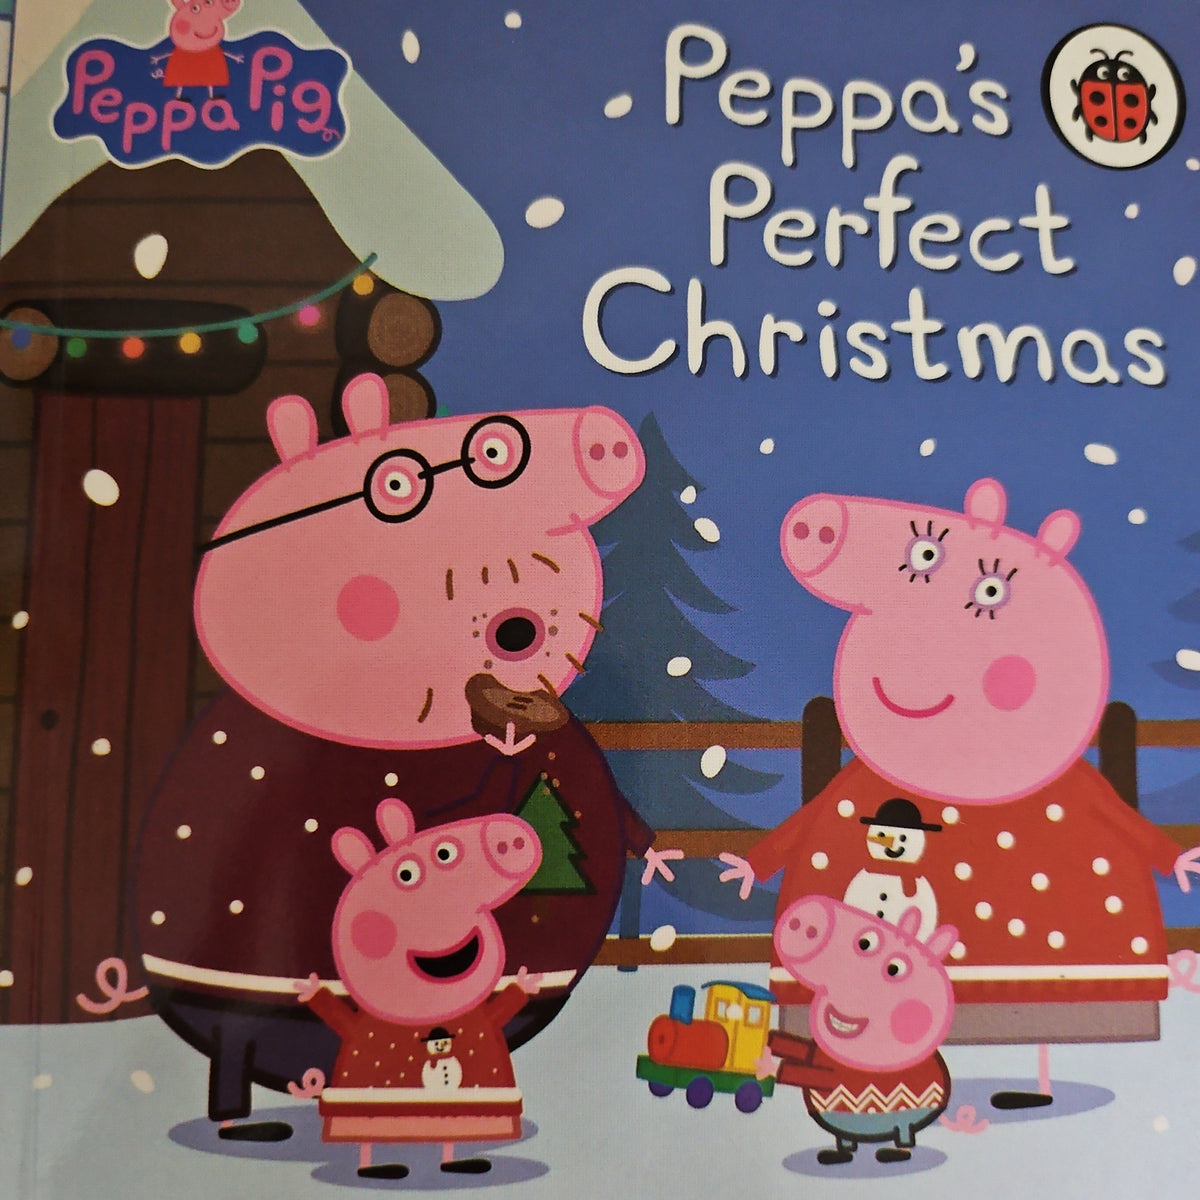 The Amazing Peppa Pig Collection:Peppa's Perfect Christmas